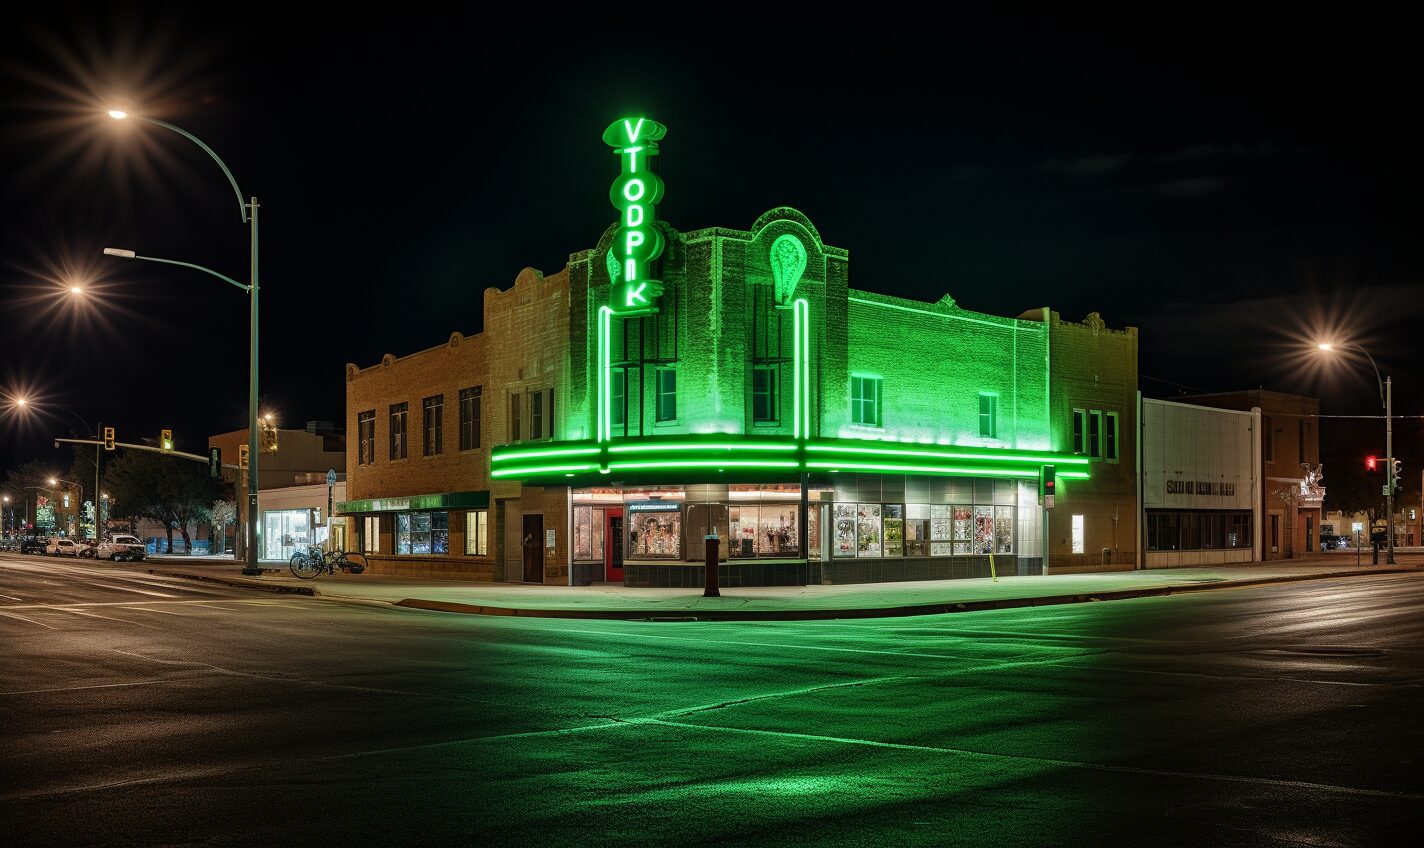 lubbock, texas in black and neon green glow